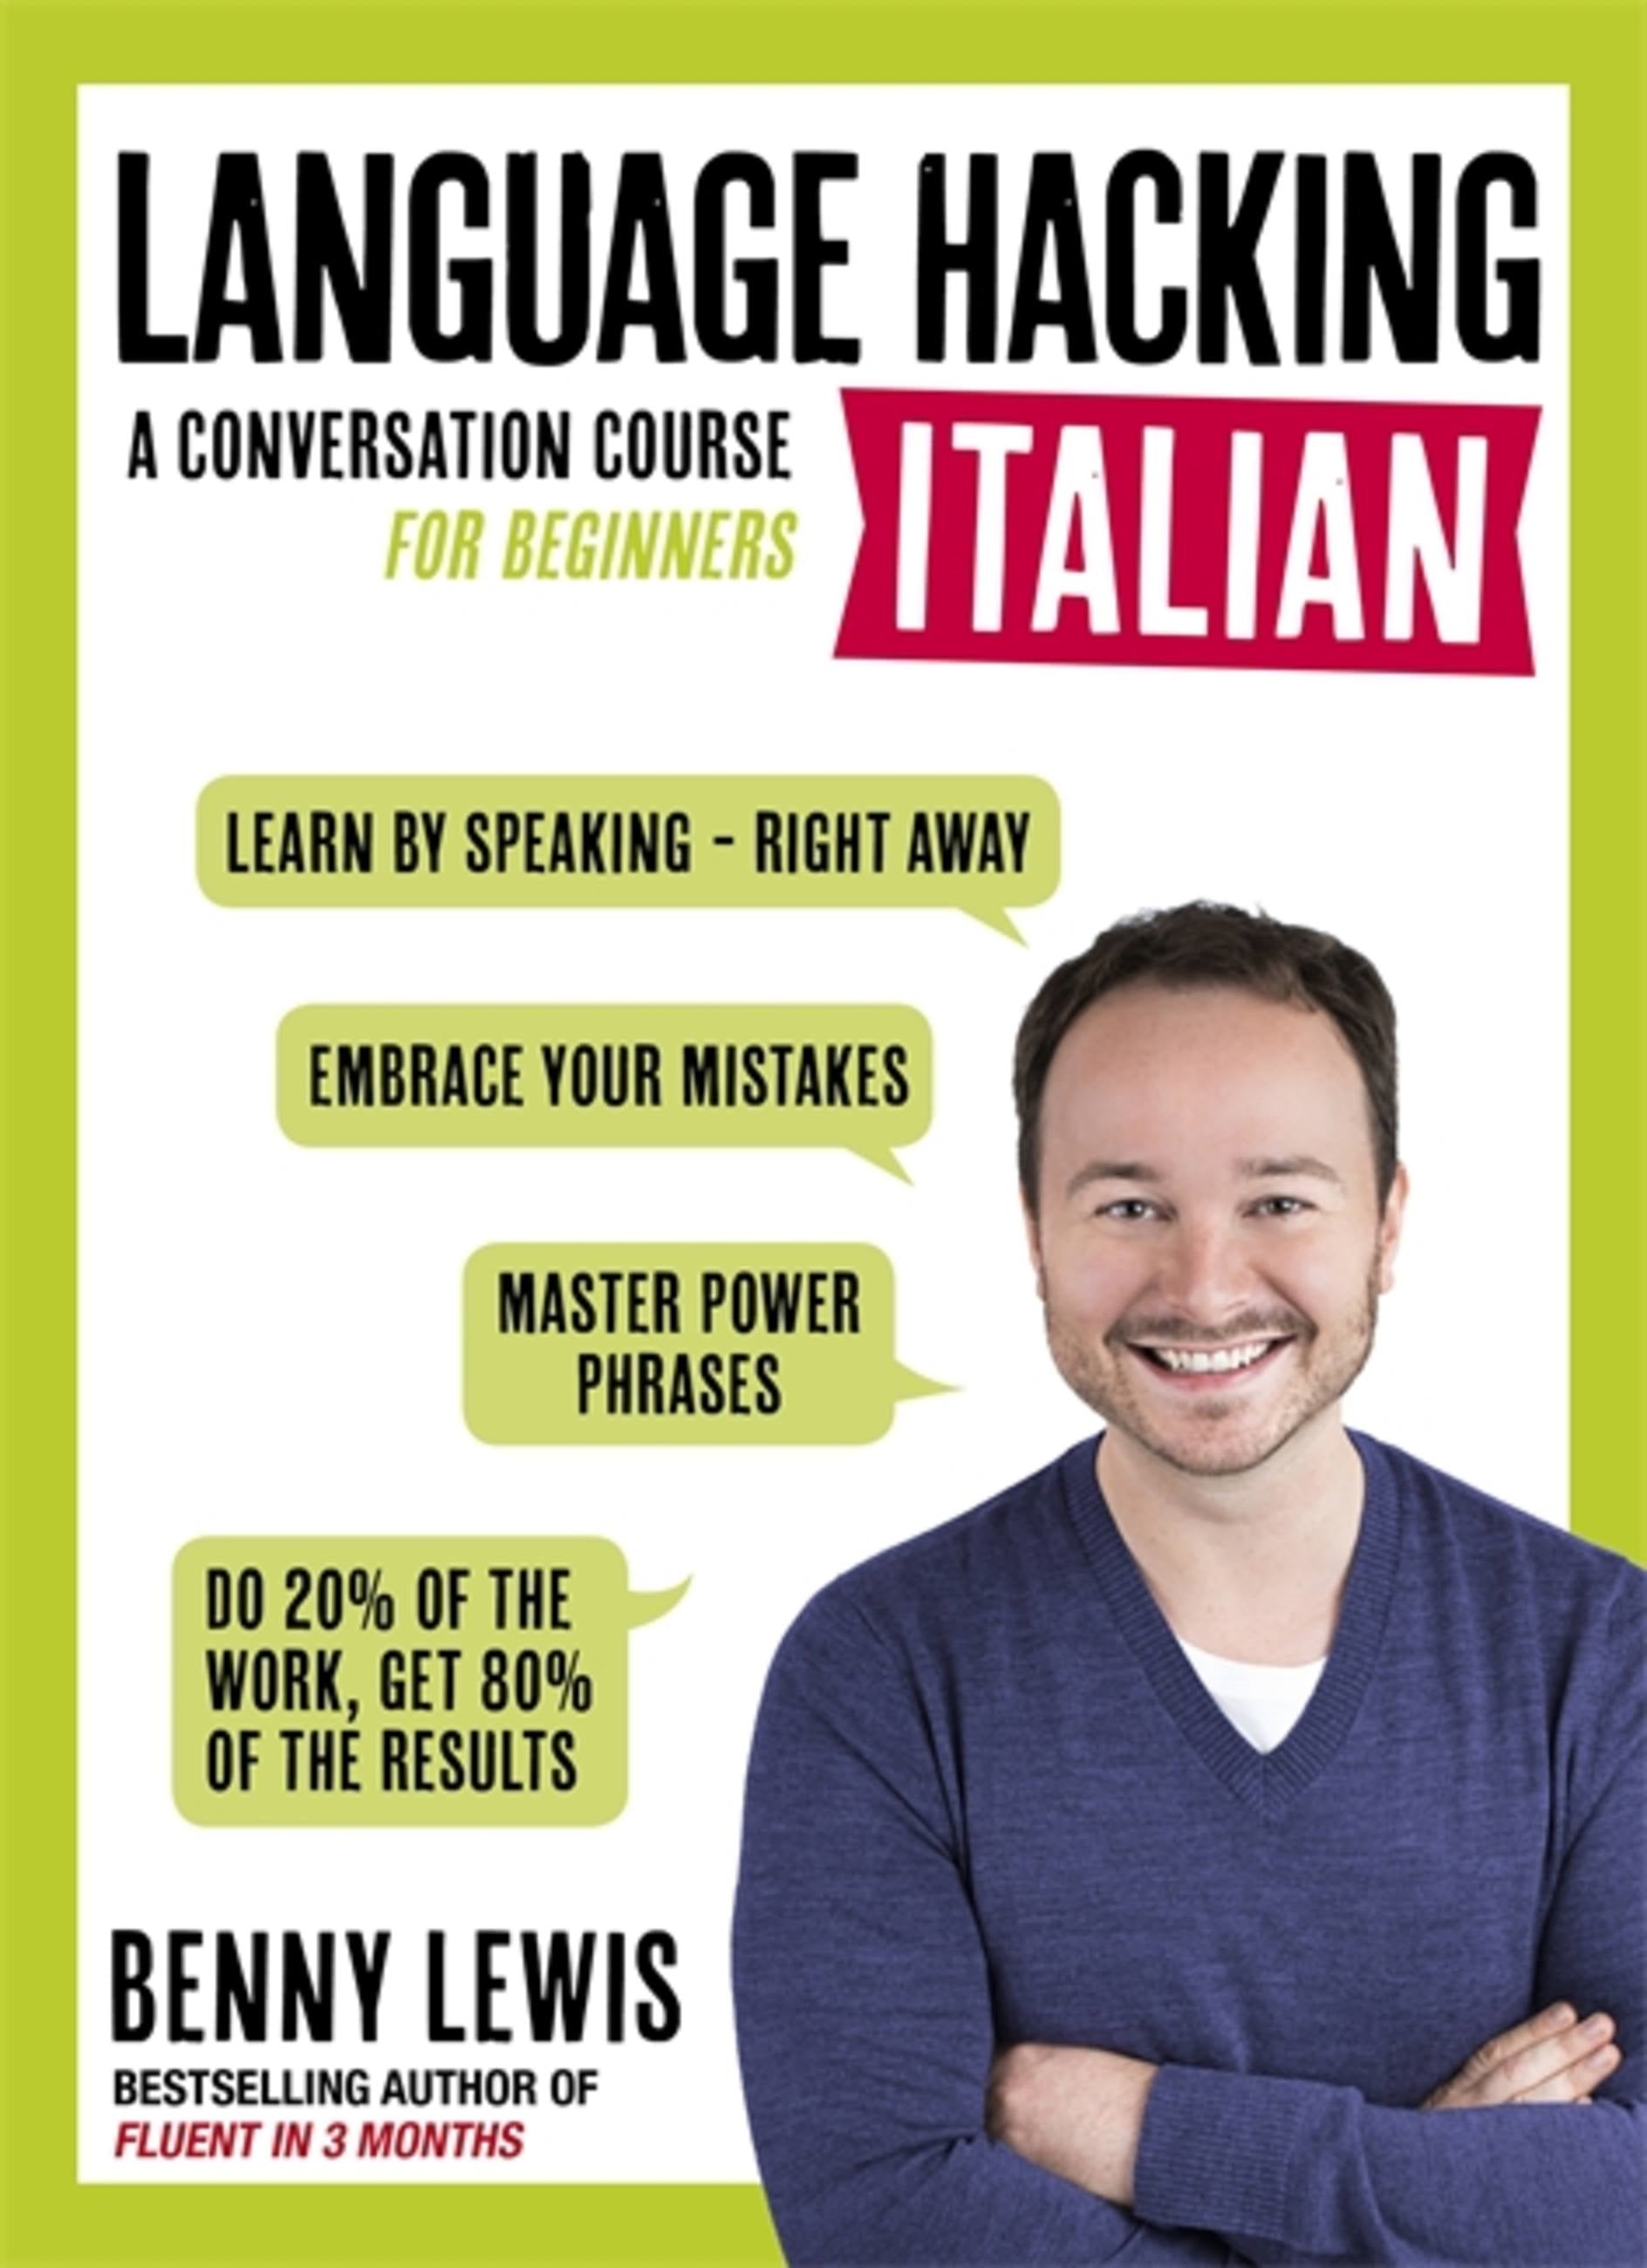 LANGUAGE HACKING ITALIAN (Learn How to Speak Italian - Right Away) by Benny Lewis